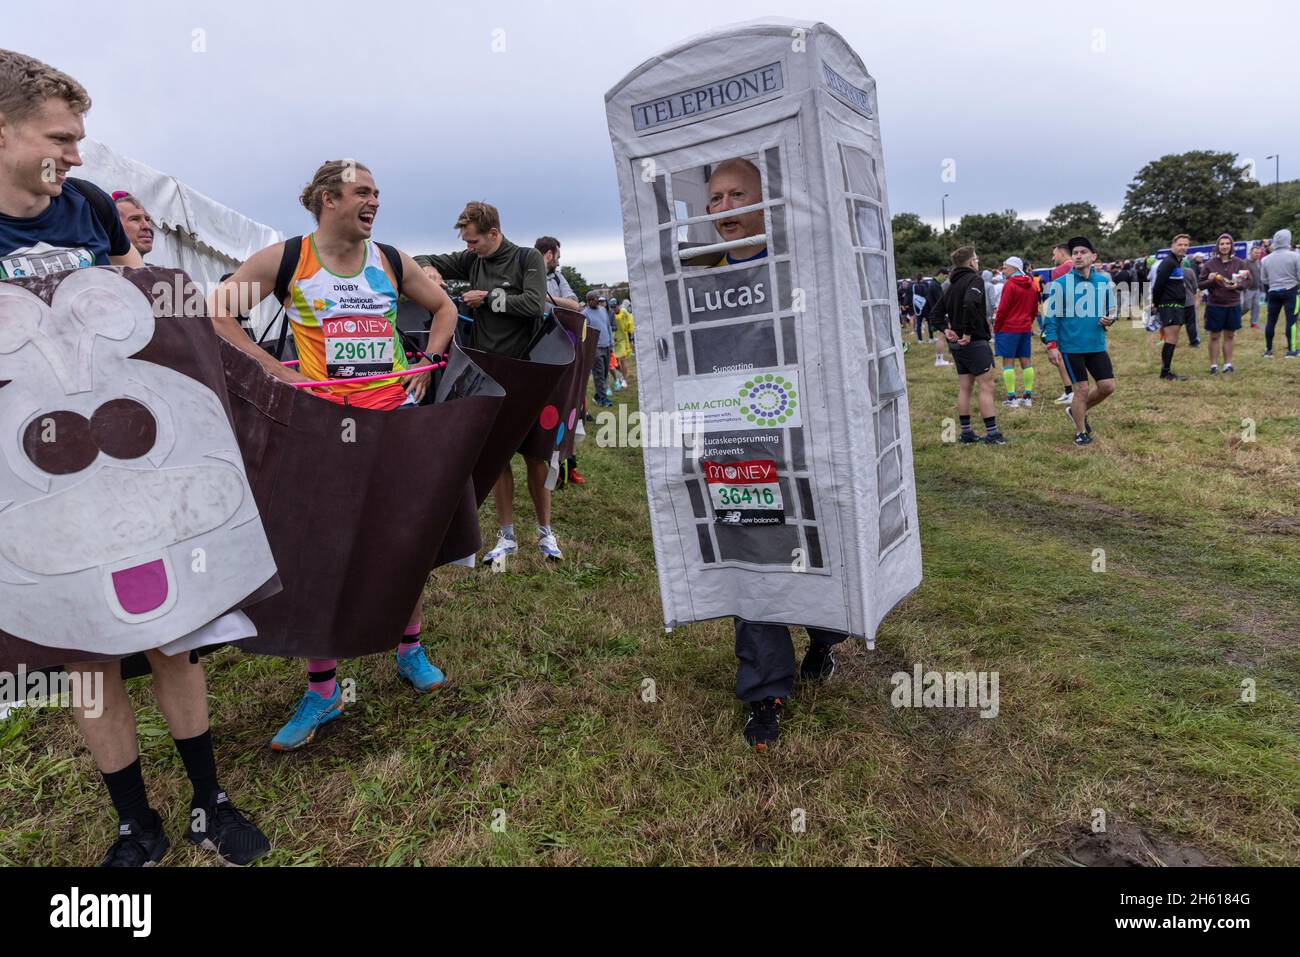 Fancy dress runners in various costumes ahead of the 2021 London Marathon congregate in Greewich Park before the race. Over 40,000 runners took part. Stock Photo